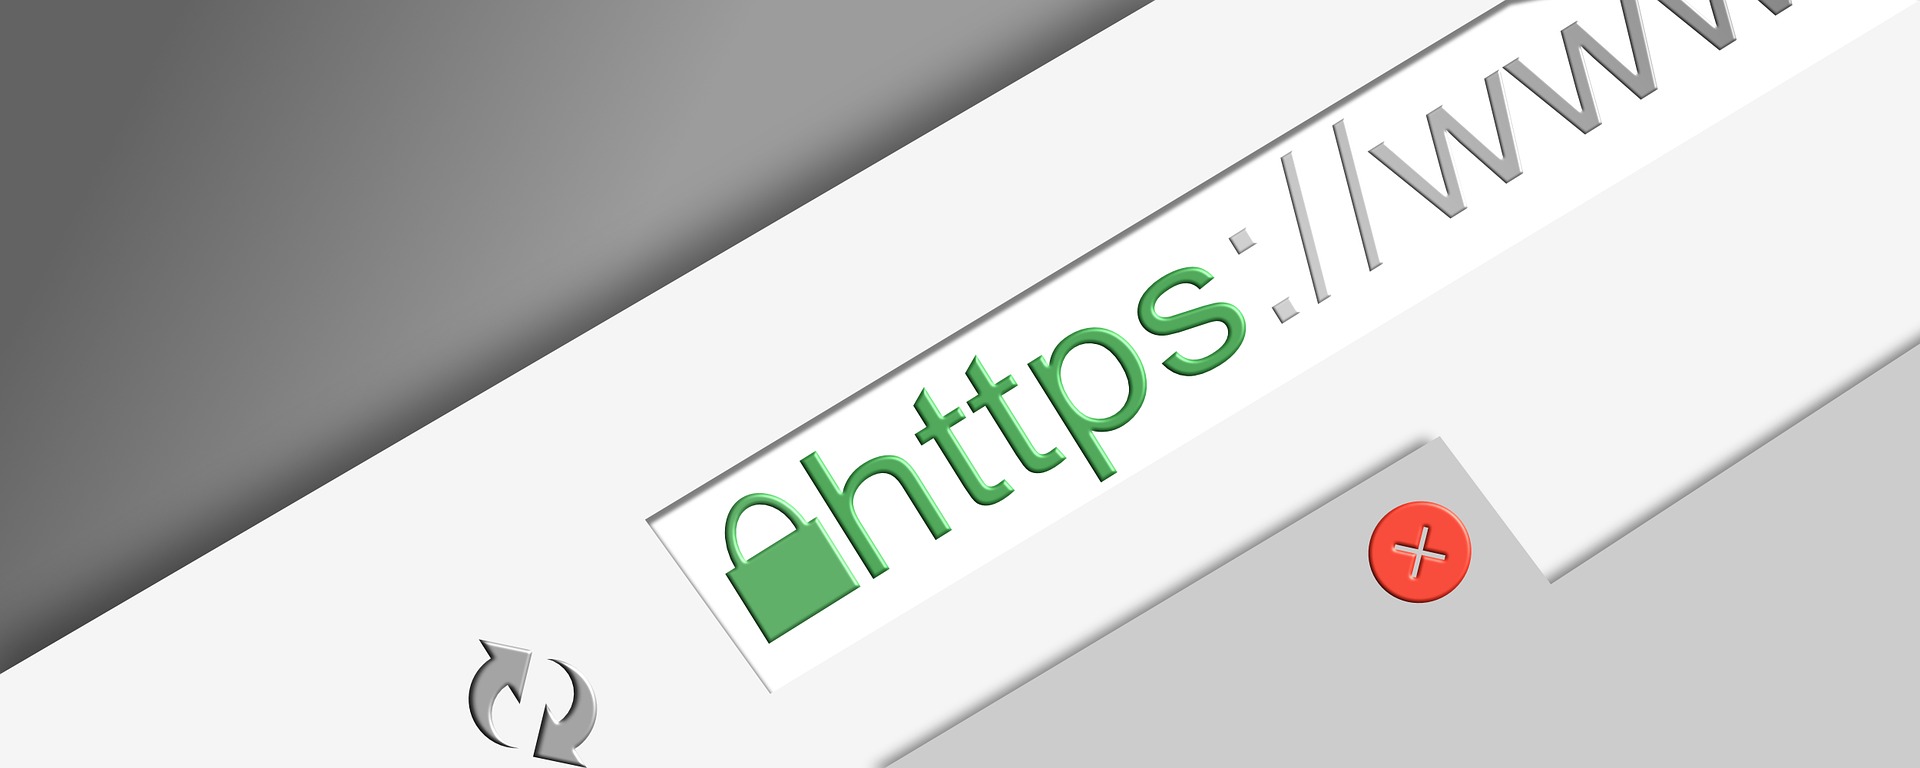 What You Need to Know About TLS and SSL